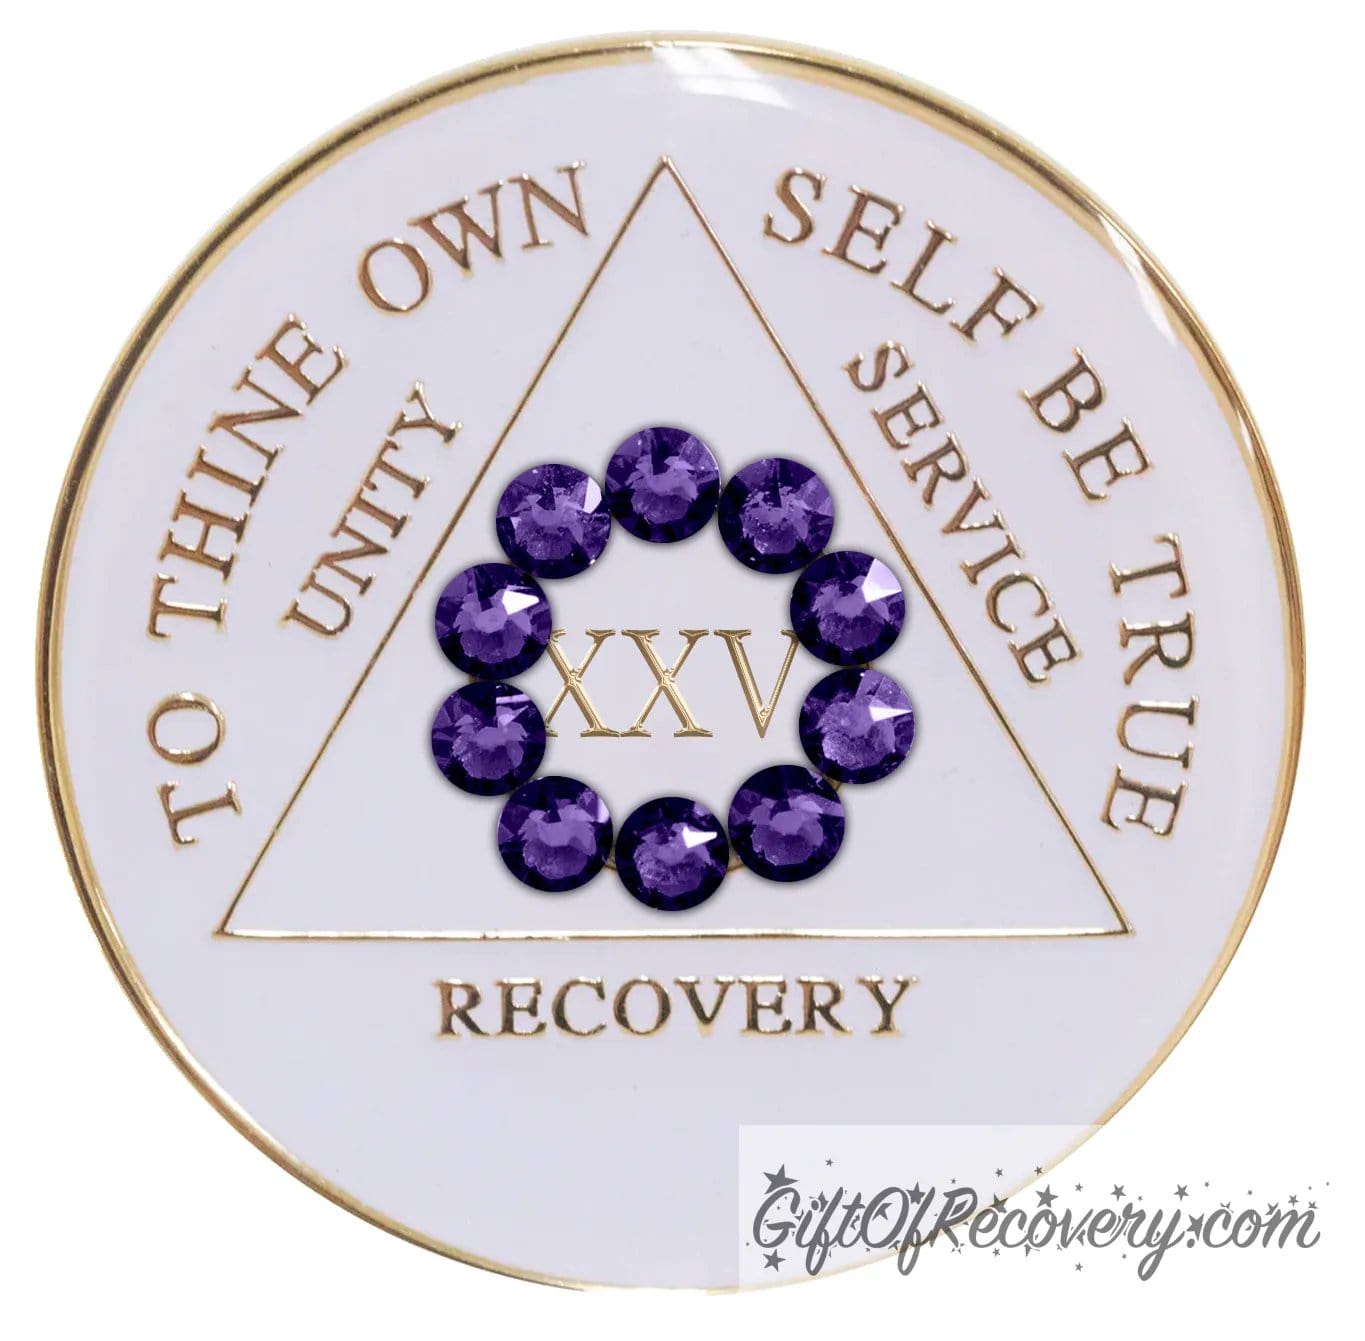 25 year AA medallion in pearl white with ten genuine purple velvet crystal in a circle representing our common welfare and personal recovery, to thine own self be true and other AA moto embossed with 14k gold-plated brass, the recovery medallion is sealed with resin for a scratch free shiny finish.